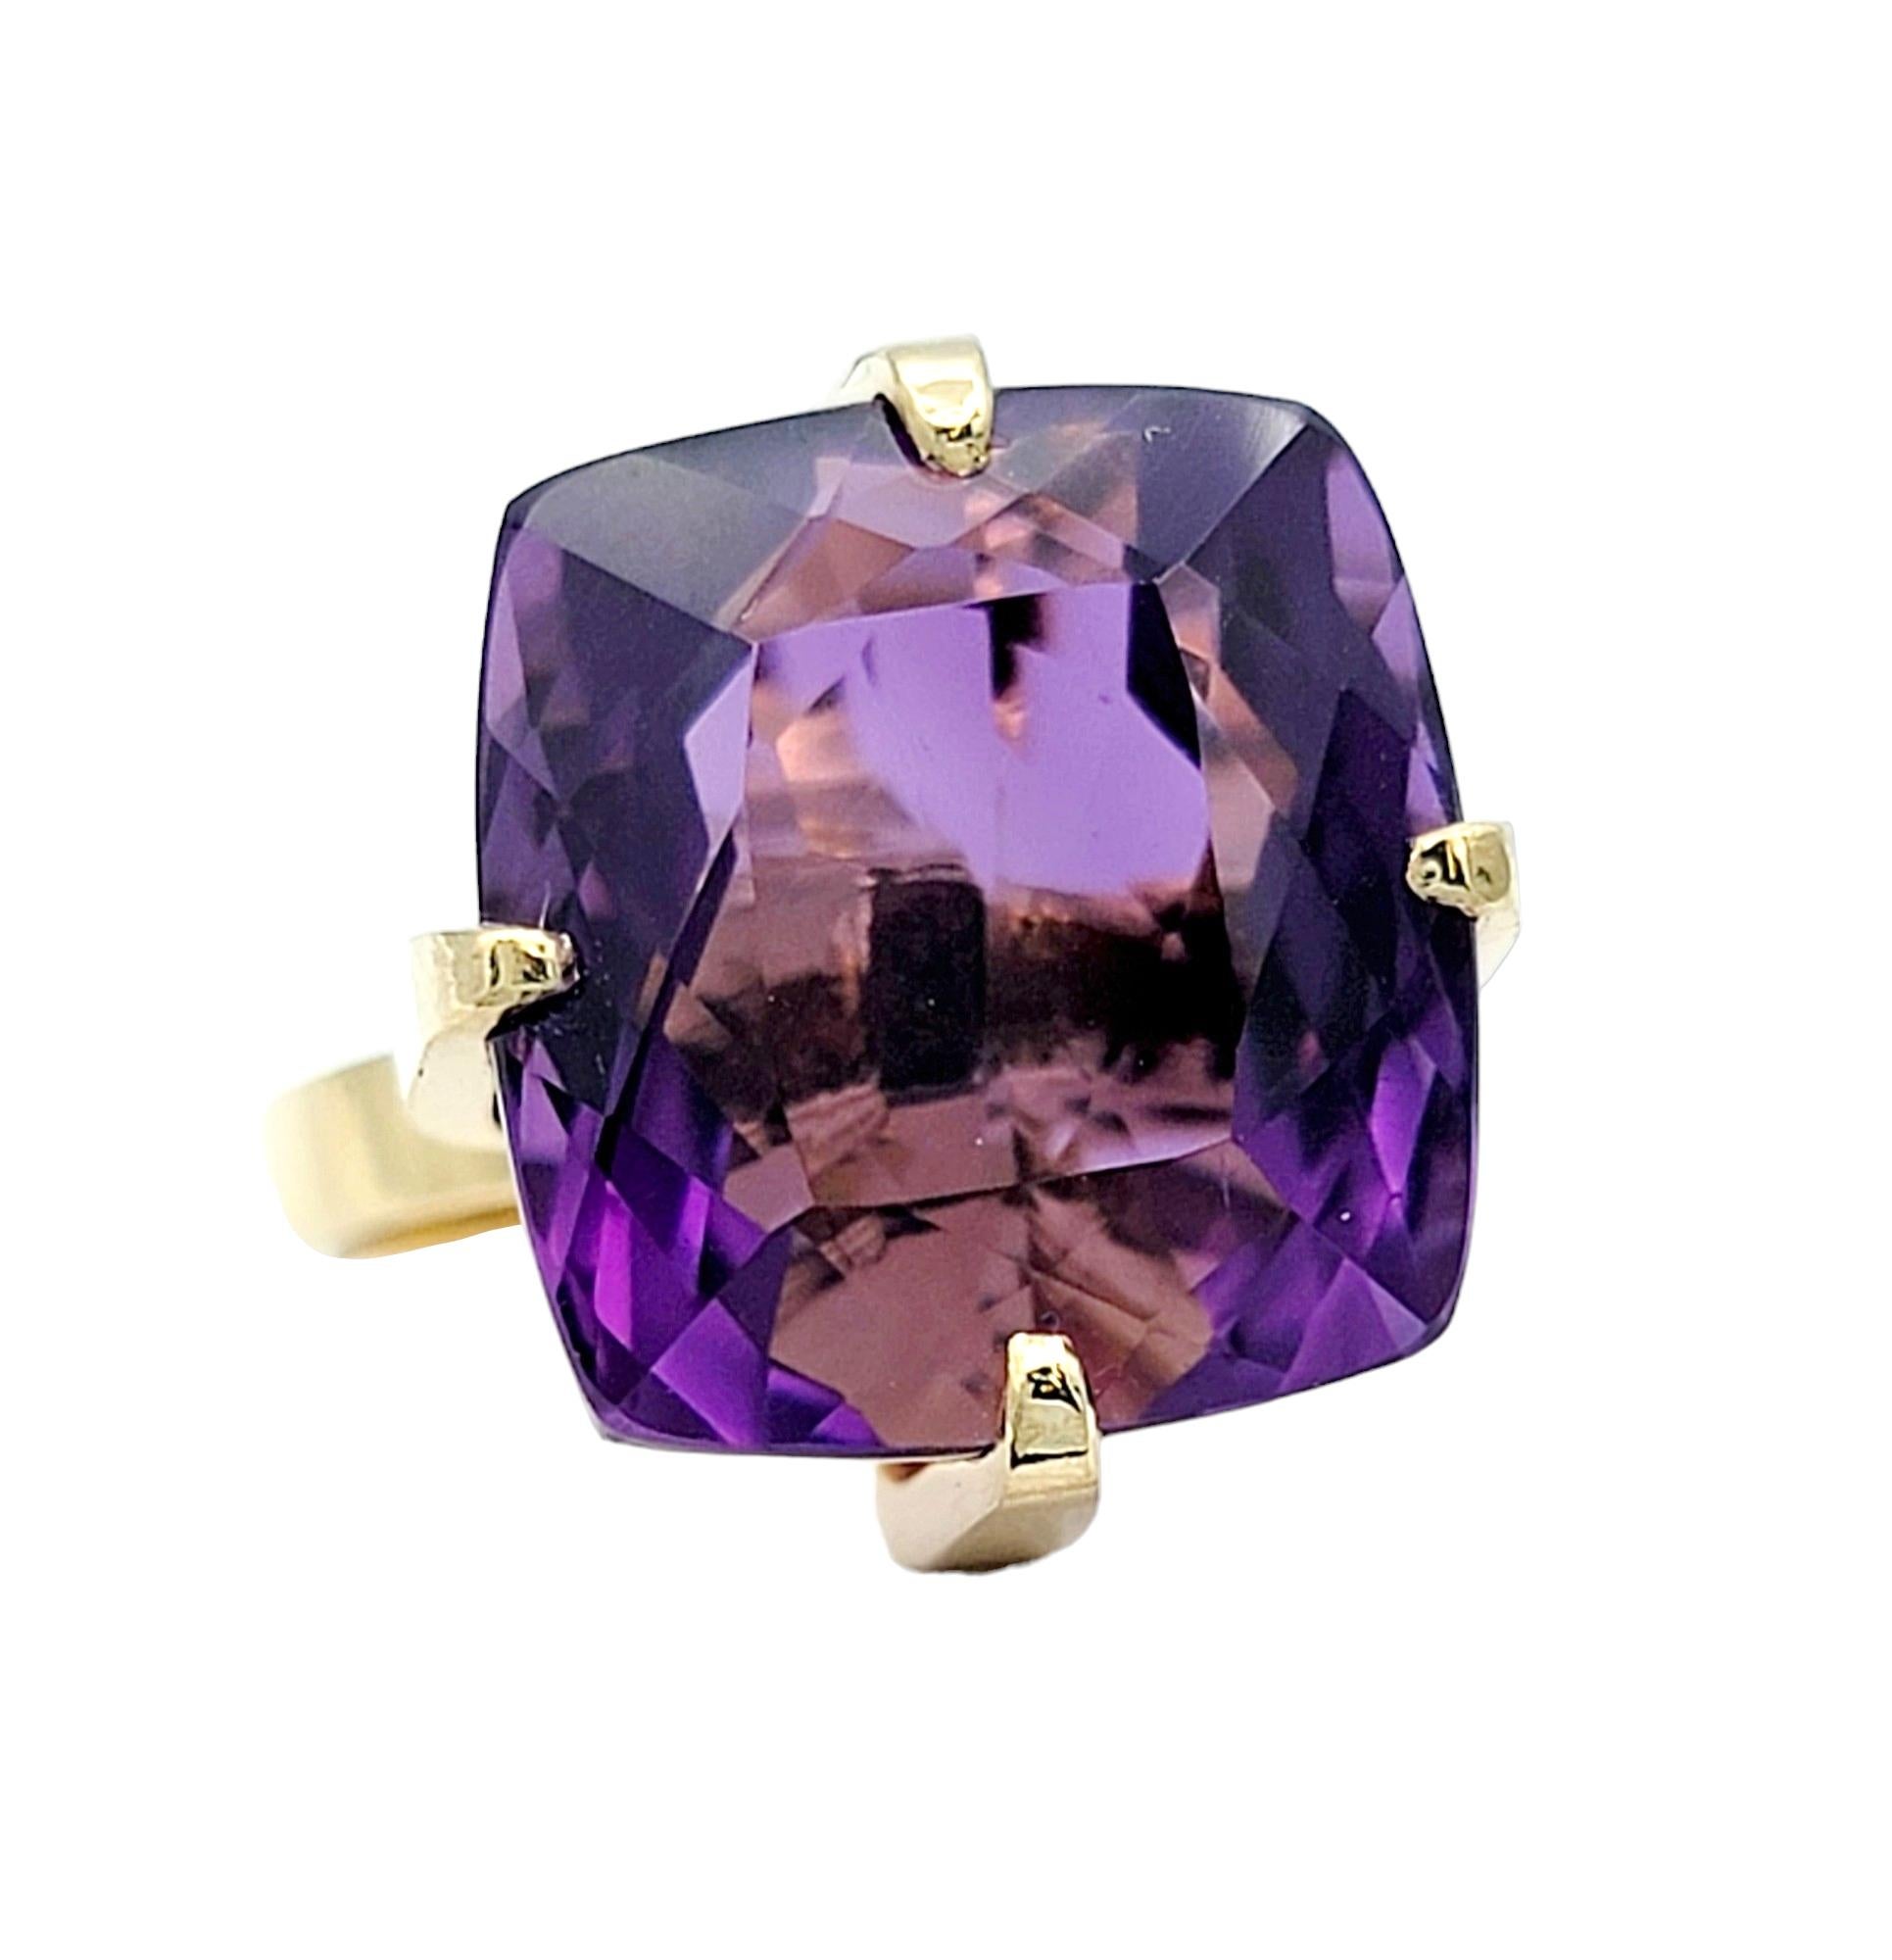 Ring Size: 5.75

This captivating high profile ring radiates regal allure, featuring a substantial cushion-cut amethyst, boasting a remarkable weight of 12.79 carats. Set in the warmth of 18 karat yellow gold, the deep purple hue of the amethyst